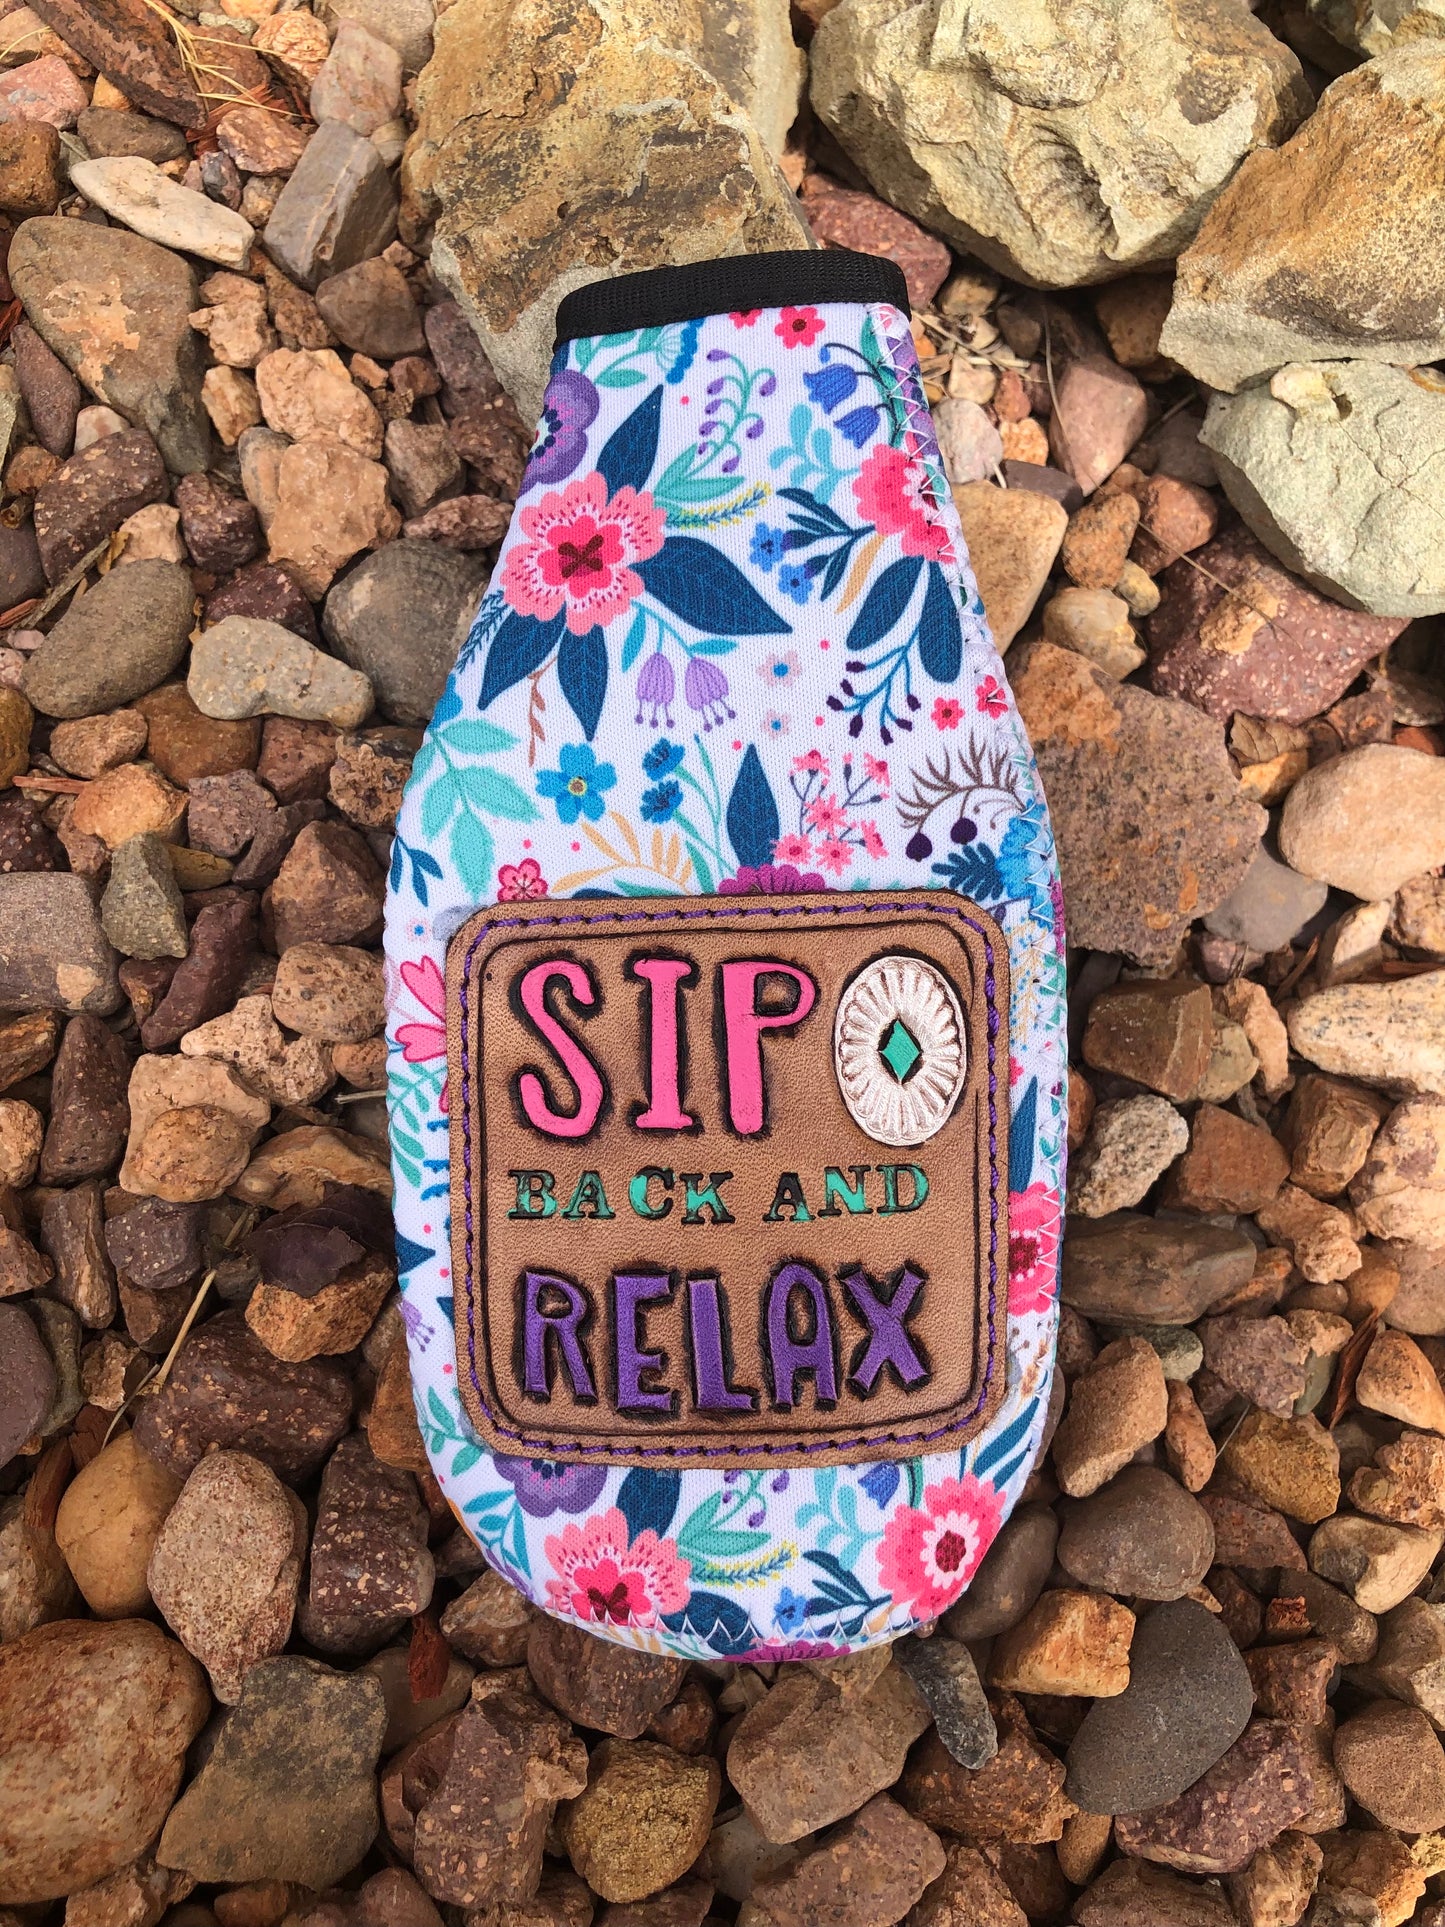 Western tooled leather sip back and relax bottle koozie